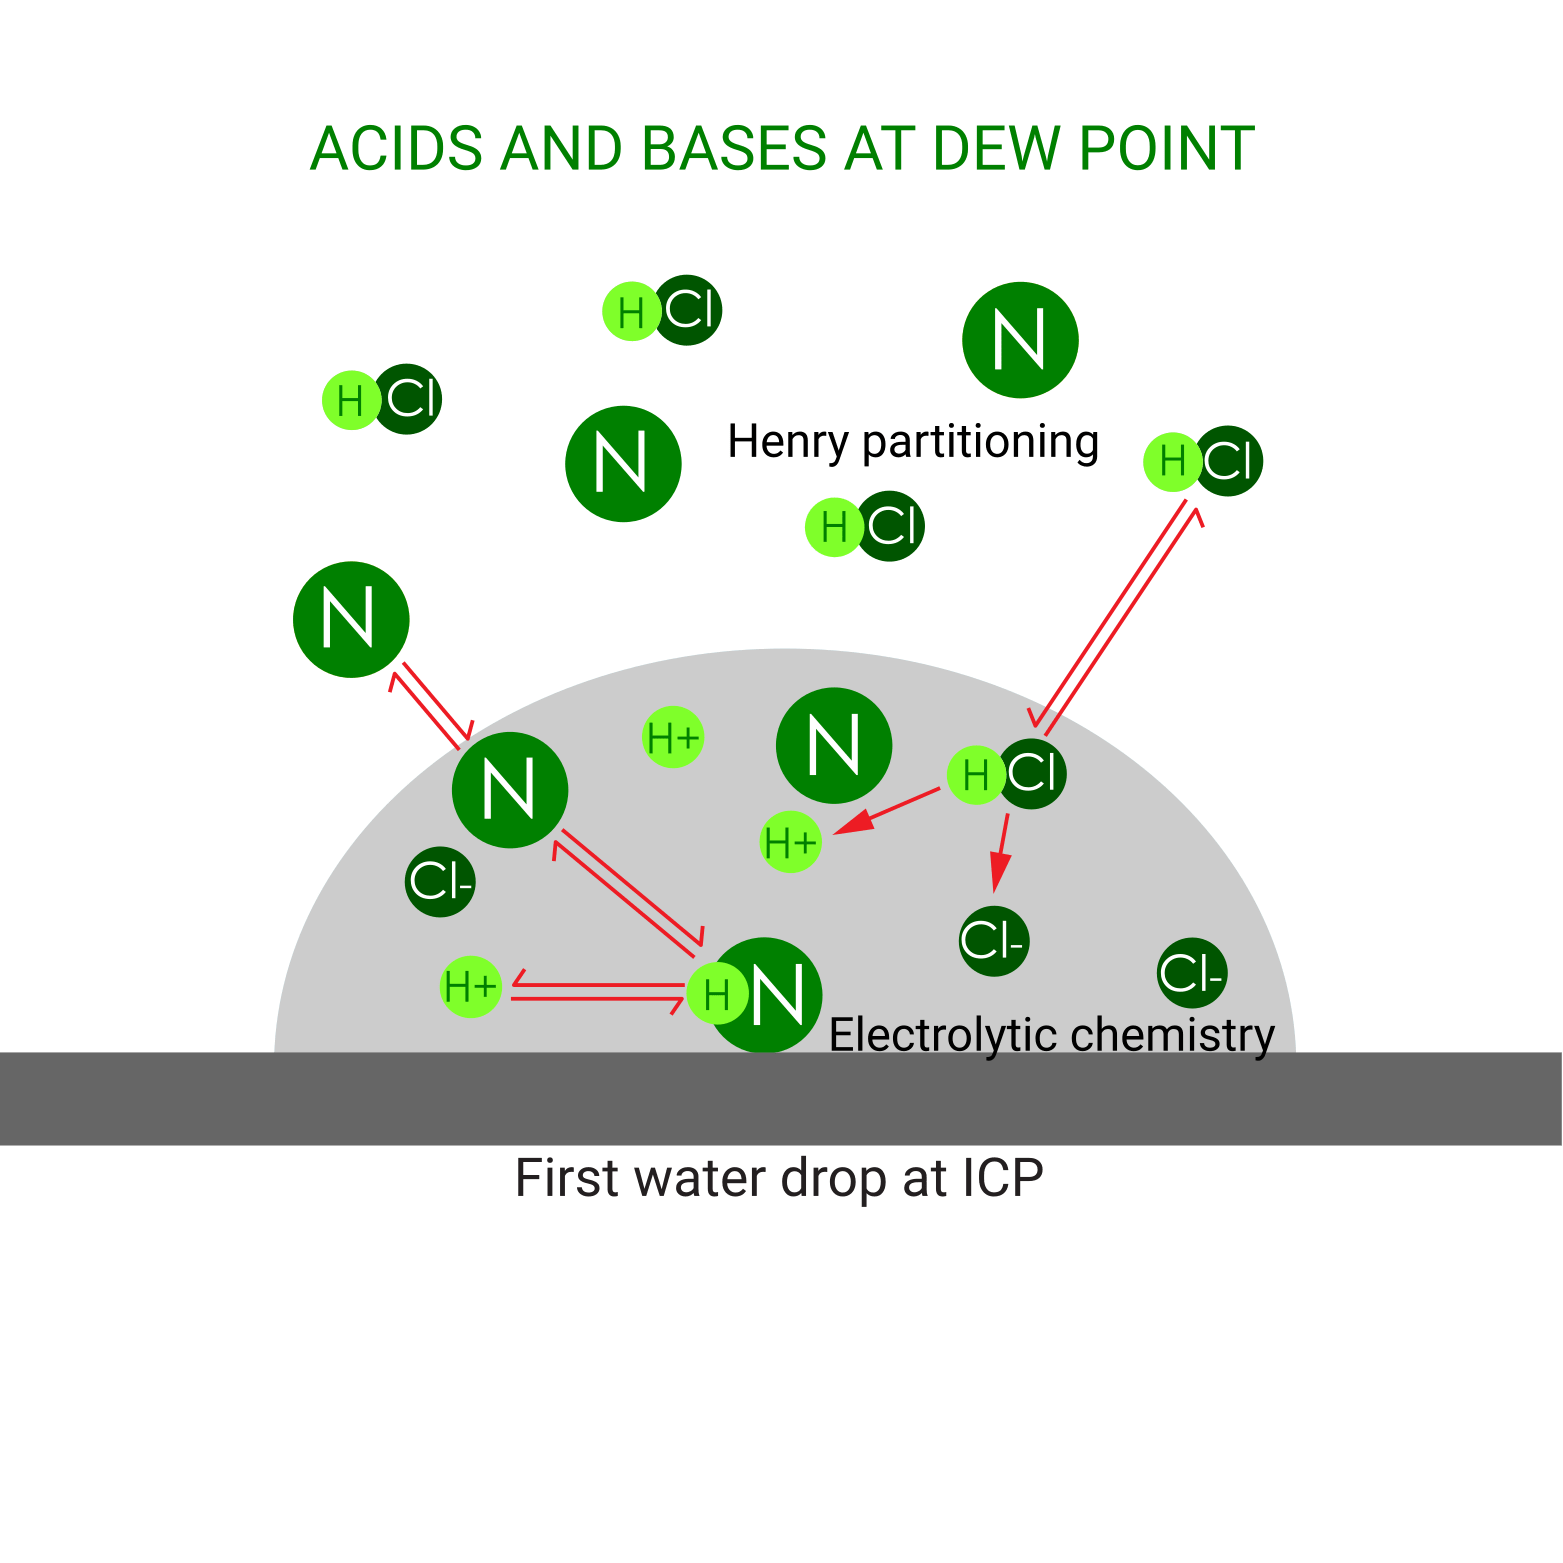 ACIDS AND BASES AT DEW POINT